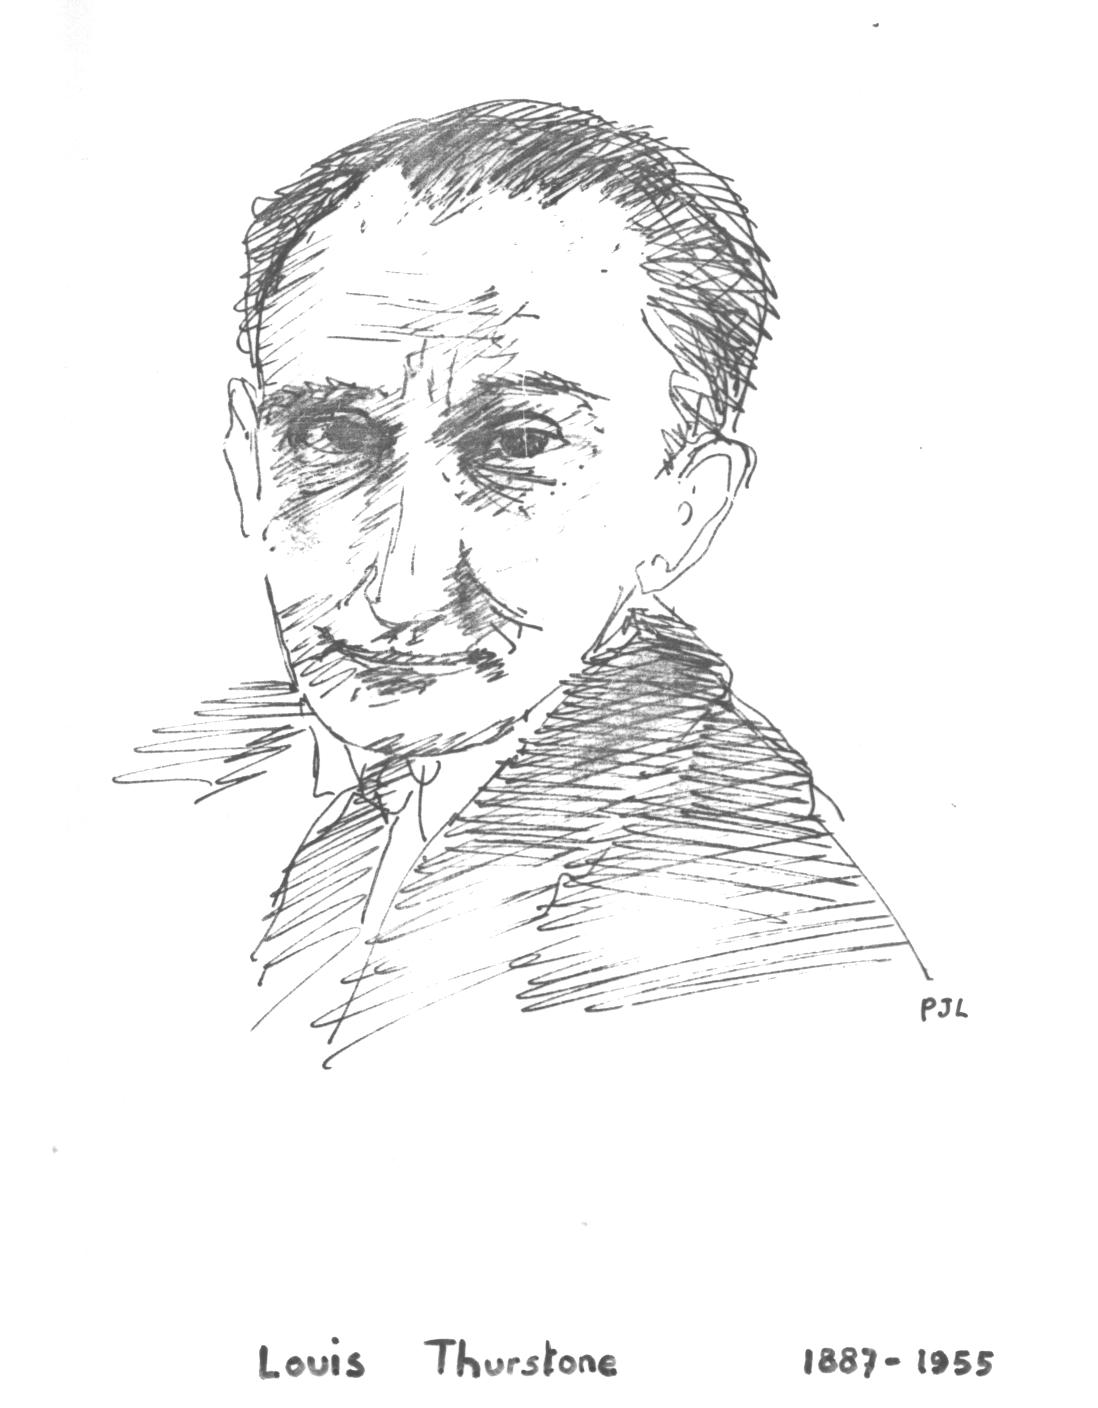 L. Thurstone, engineer and psychologist, founder of multiple factor analysis in the study of human intelligence, ref.: drawing by author (P J Lewi) after a photograph with permission of the University of North Carolina at Chapel Hill, NC 